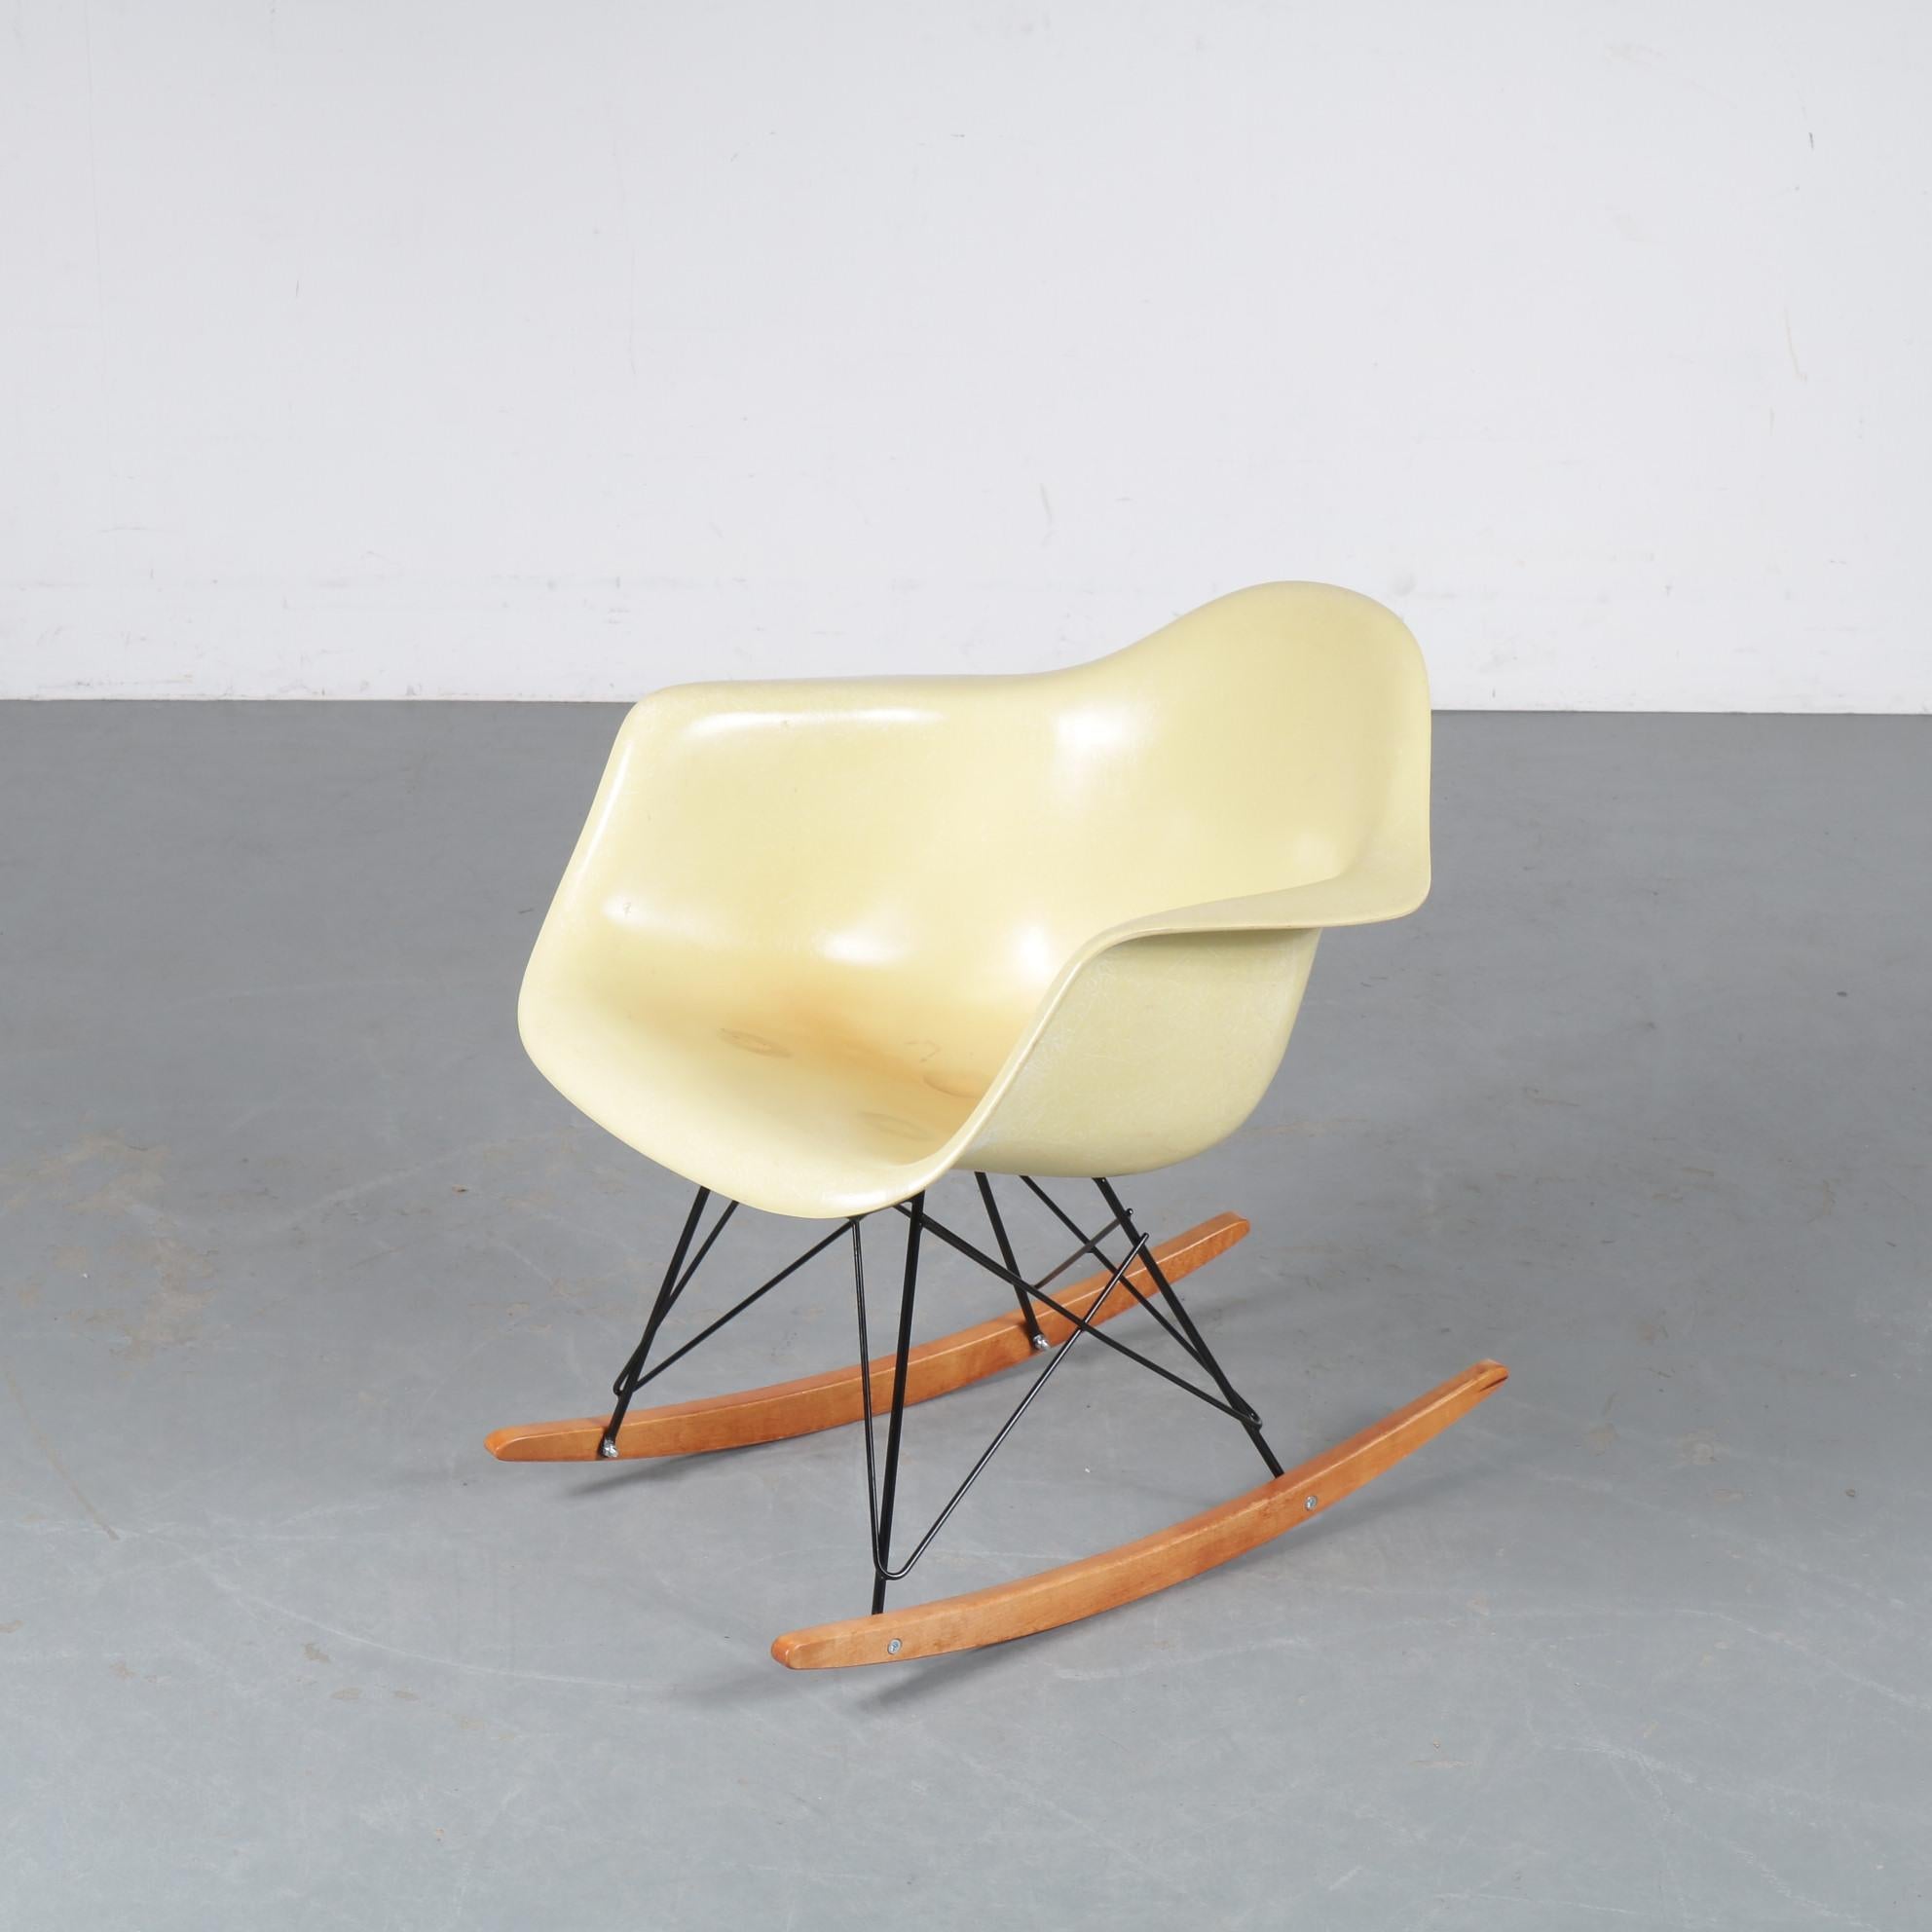 American Rare Eames Zenith Rocking Chair for Herman Miller, USA 1950 For Sale